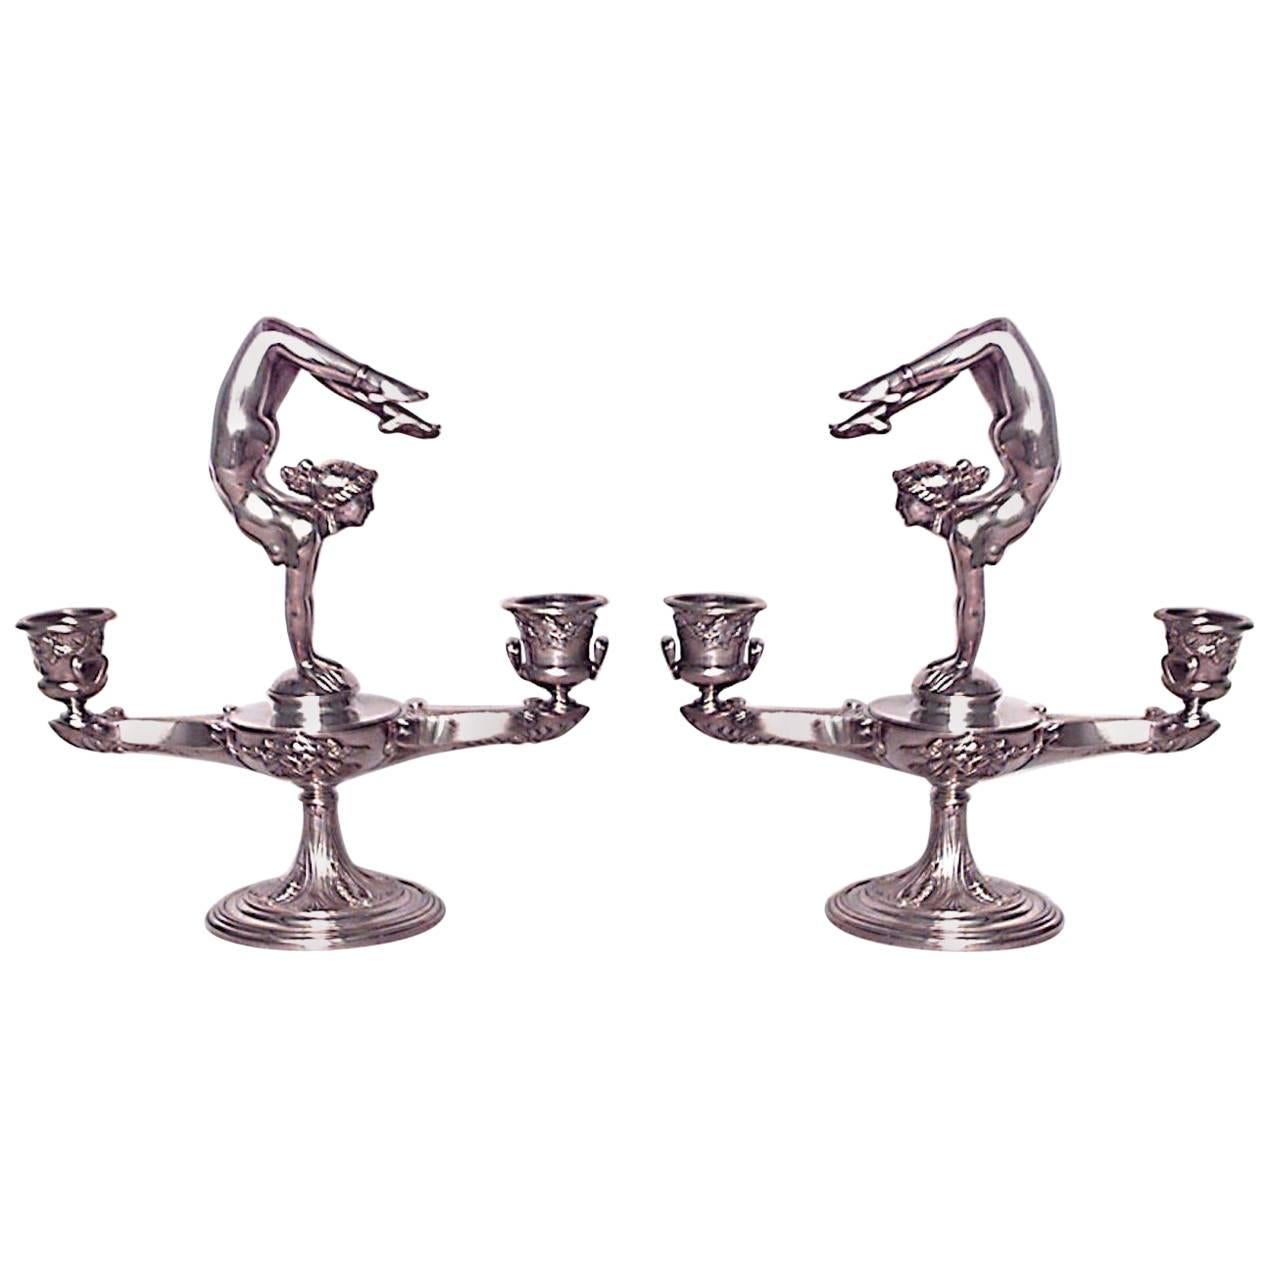 Pair of French Art Nouveau Silver Plate Candelabras with Acrobat Figures